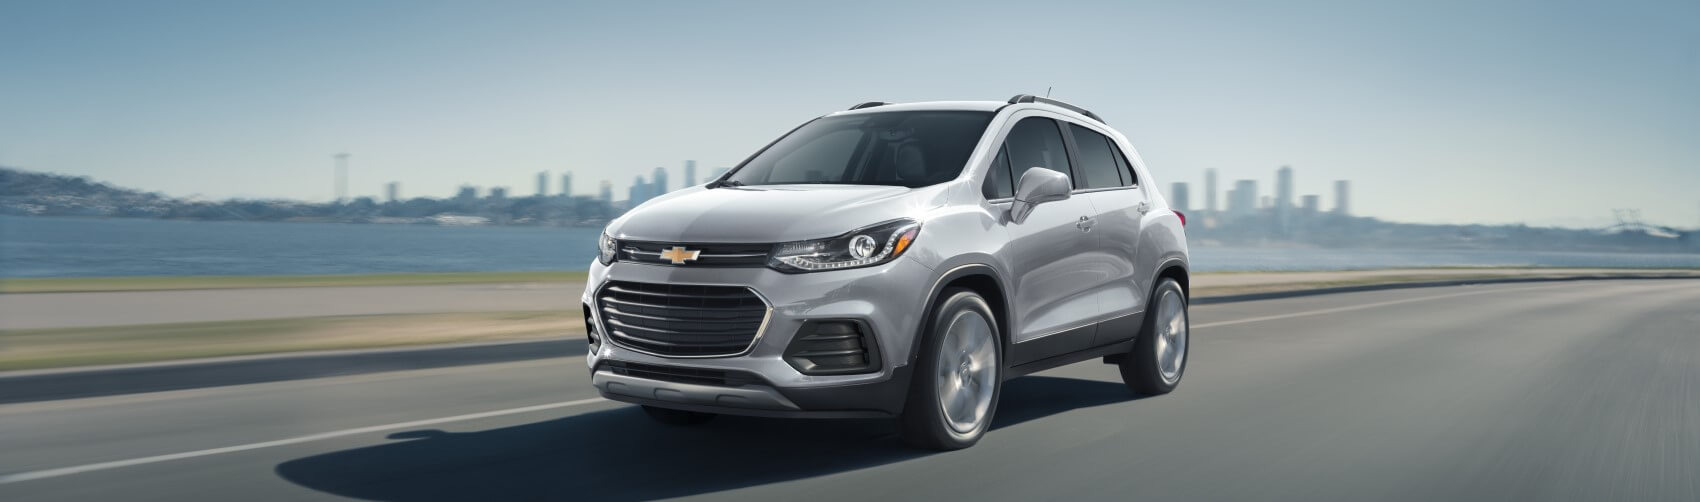 Chevy Trax Lease Deals near Sterling Heights MI